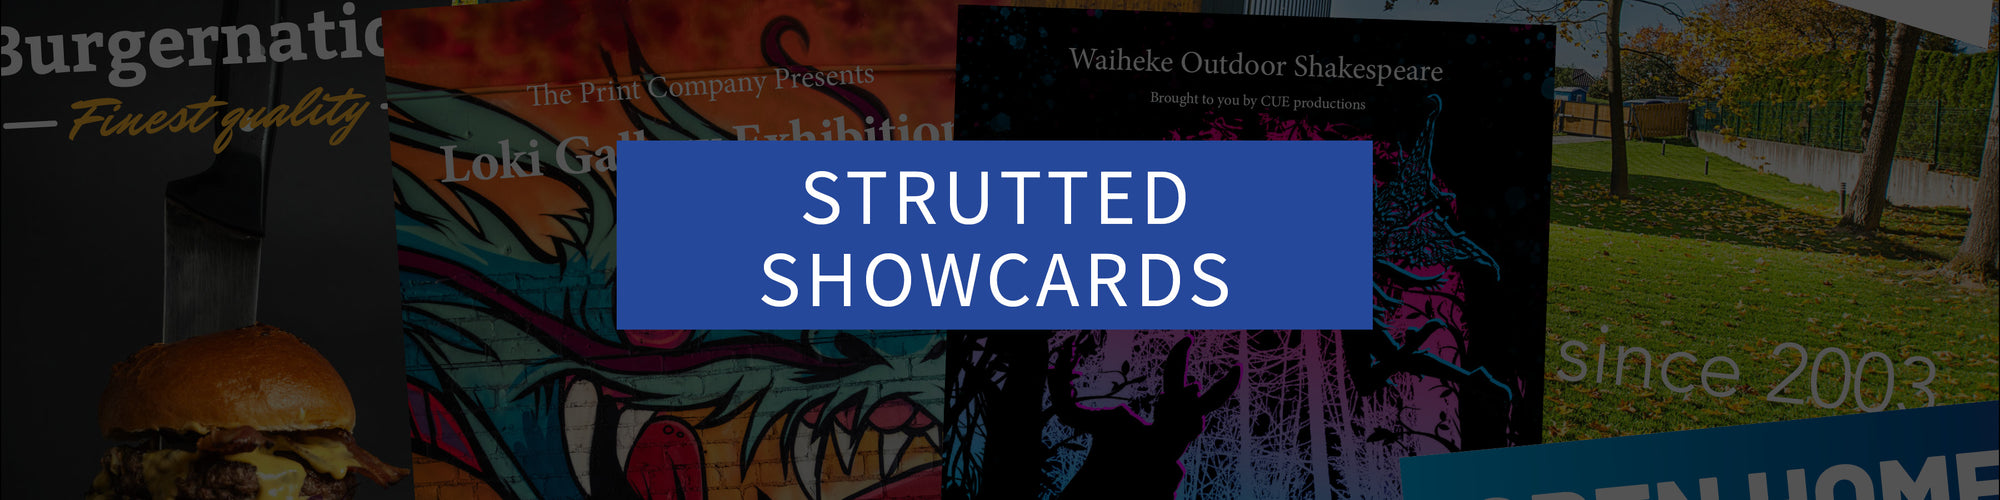 Strutted showcards